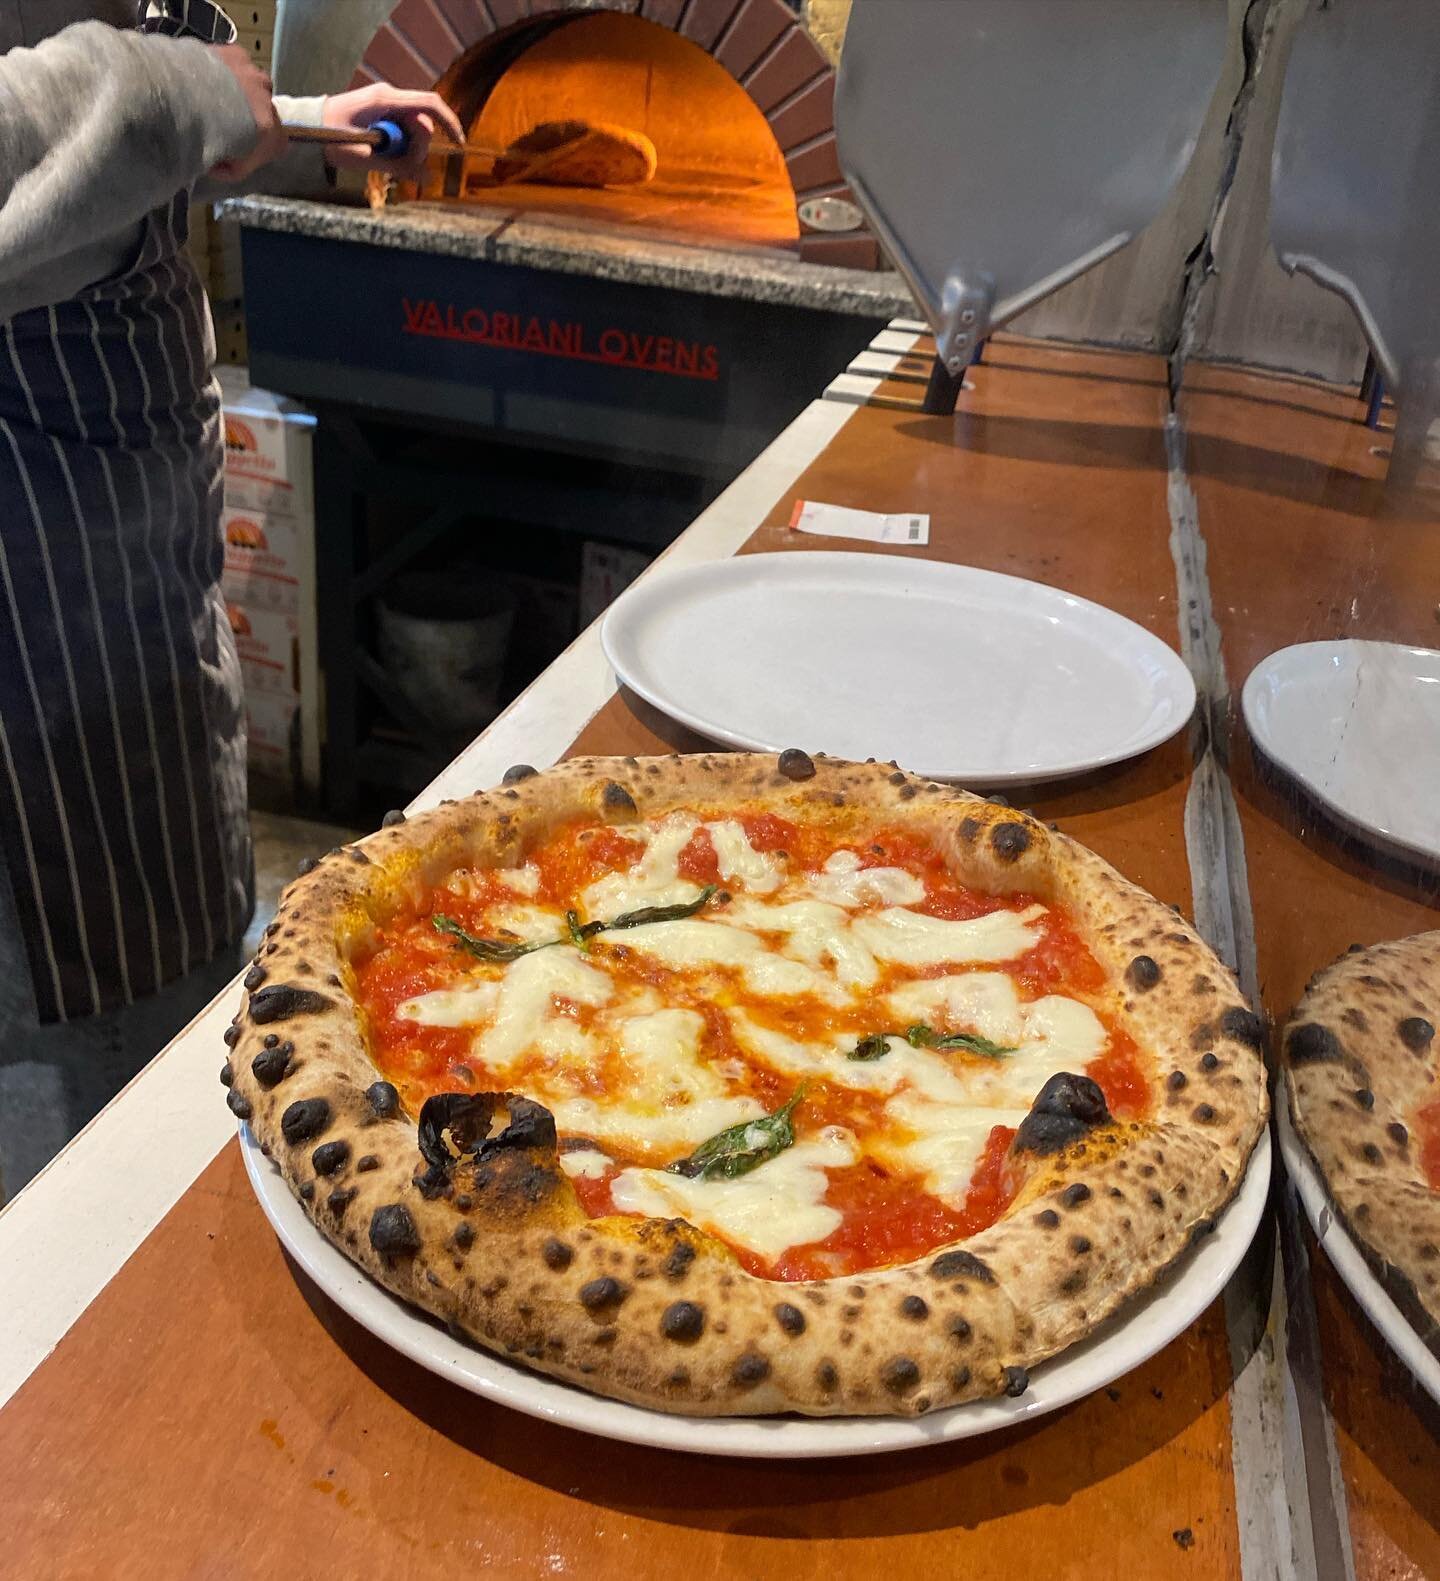 Hello pawb 👋

Firstly we would like thank each and everyone of you for your continued support over these past few years. Times have been difficult and it is because of you that we as a business have been able to continue and enjoy making pizza.

Wit